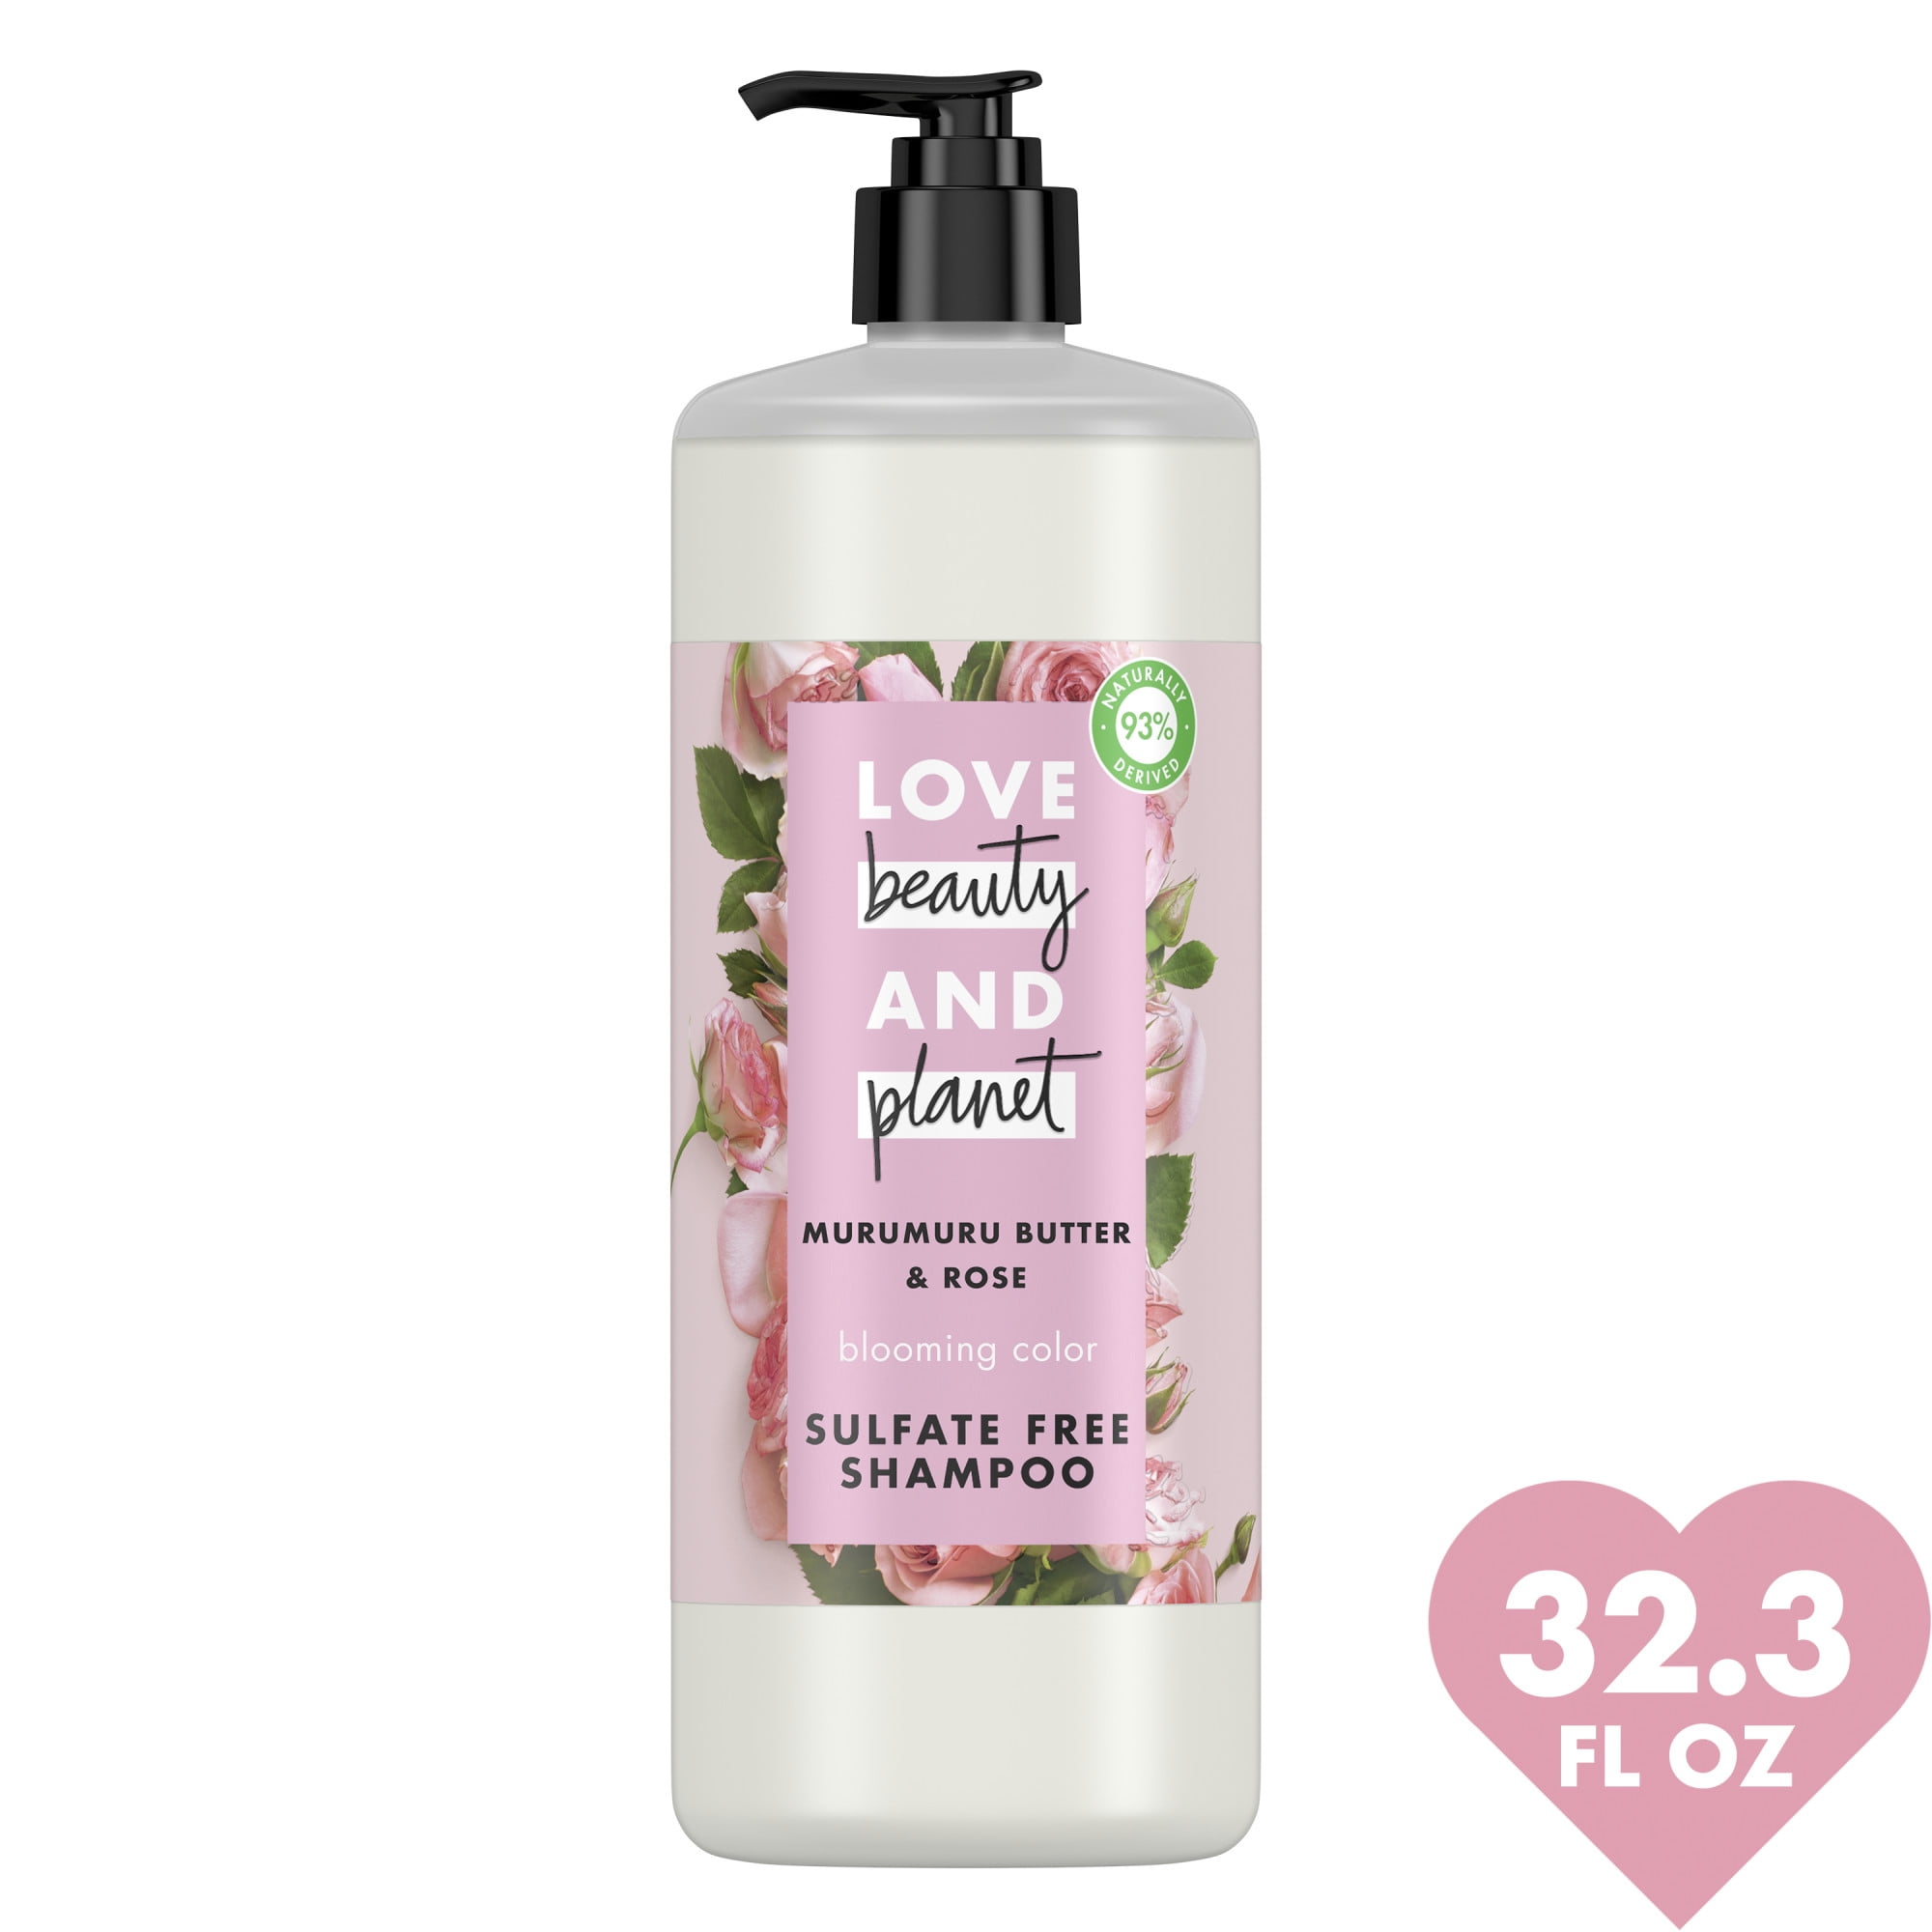 Beauty And Planet Blooming Color Murumuru Butter and Sulfate-Free Shampoo Vegan, Paraben-free, Silicone-free, Cruelty-free for Color Treated Hair 32.3 - Walmart.com